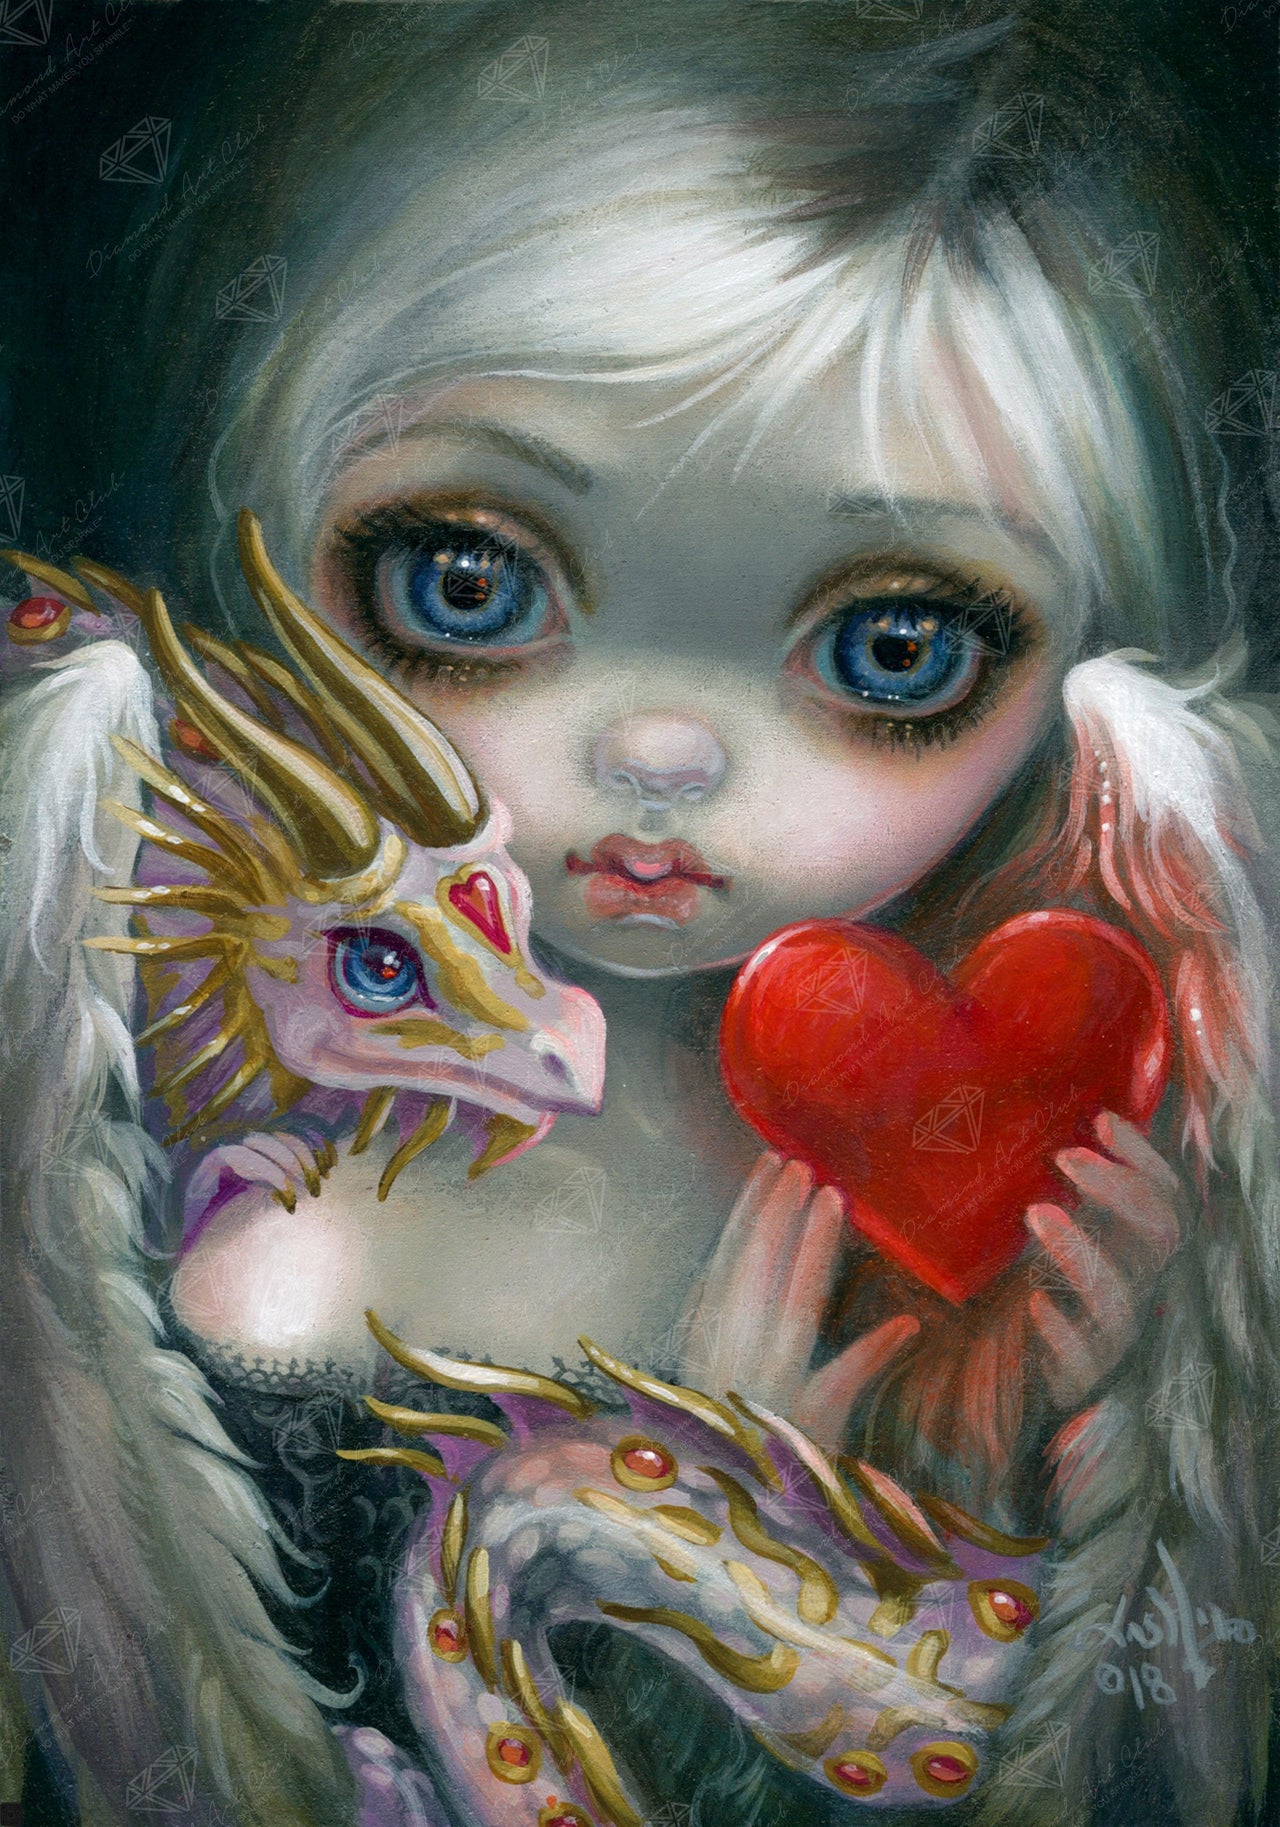 Diamond Painting A Dragonling Valentine 17" x 24" (43cm x 61cm) / Round with 56 Colors including 2 ABs / 32,984